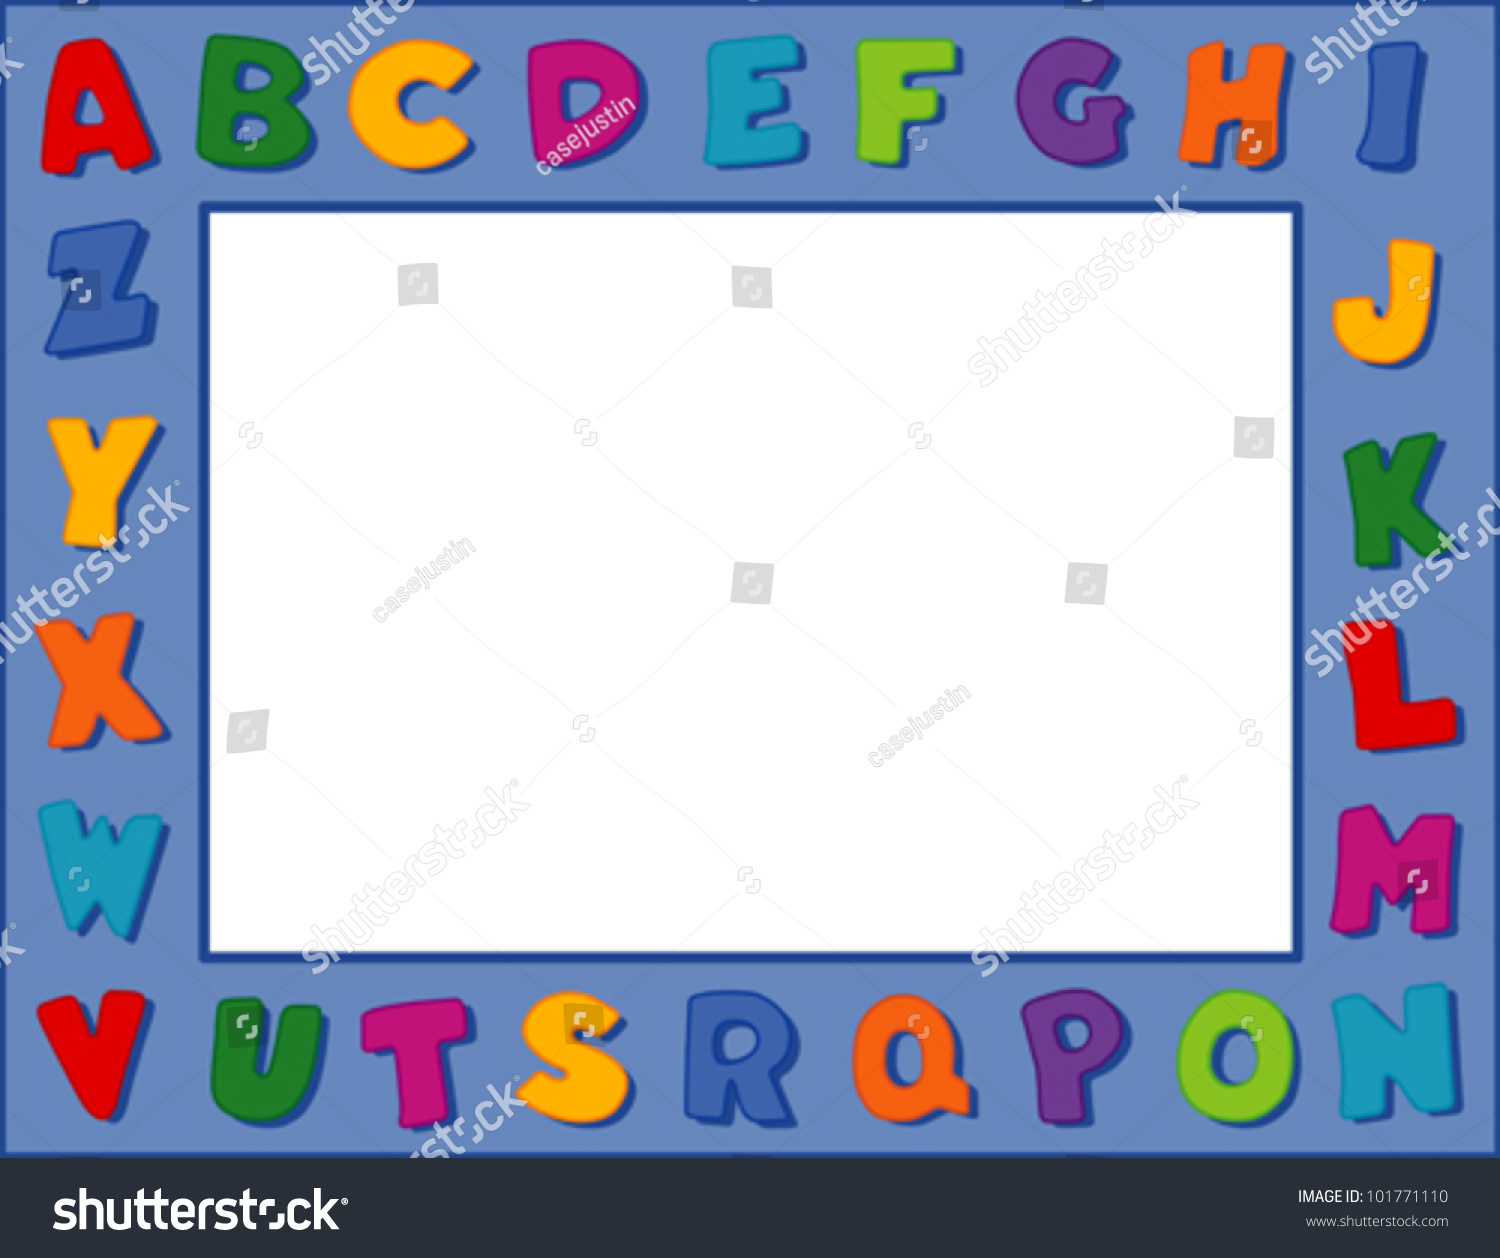 Alphabet Frame, Bright Letters, Blue Border, Copy Space For Education ...